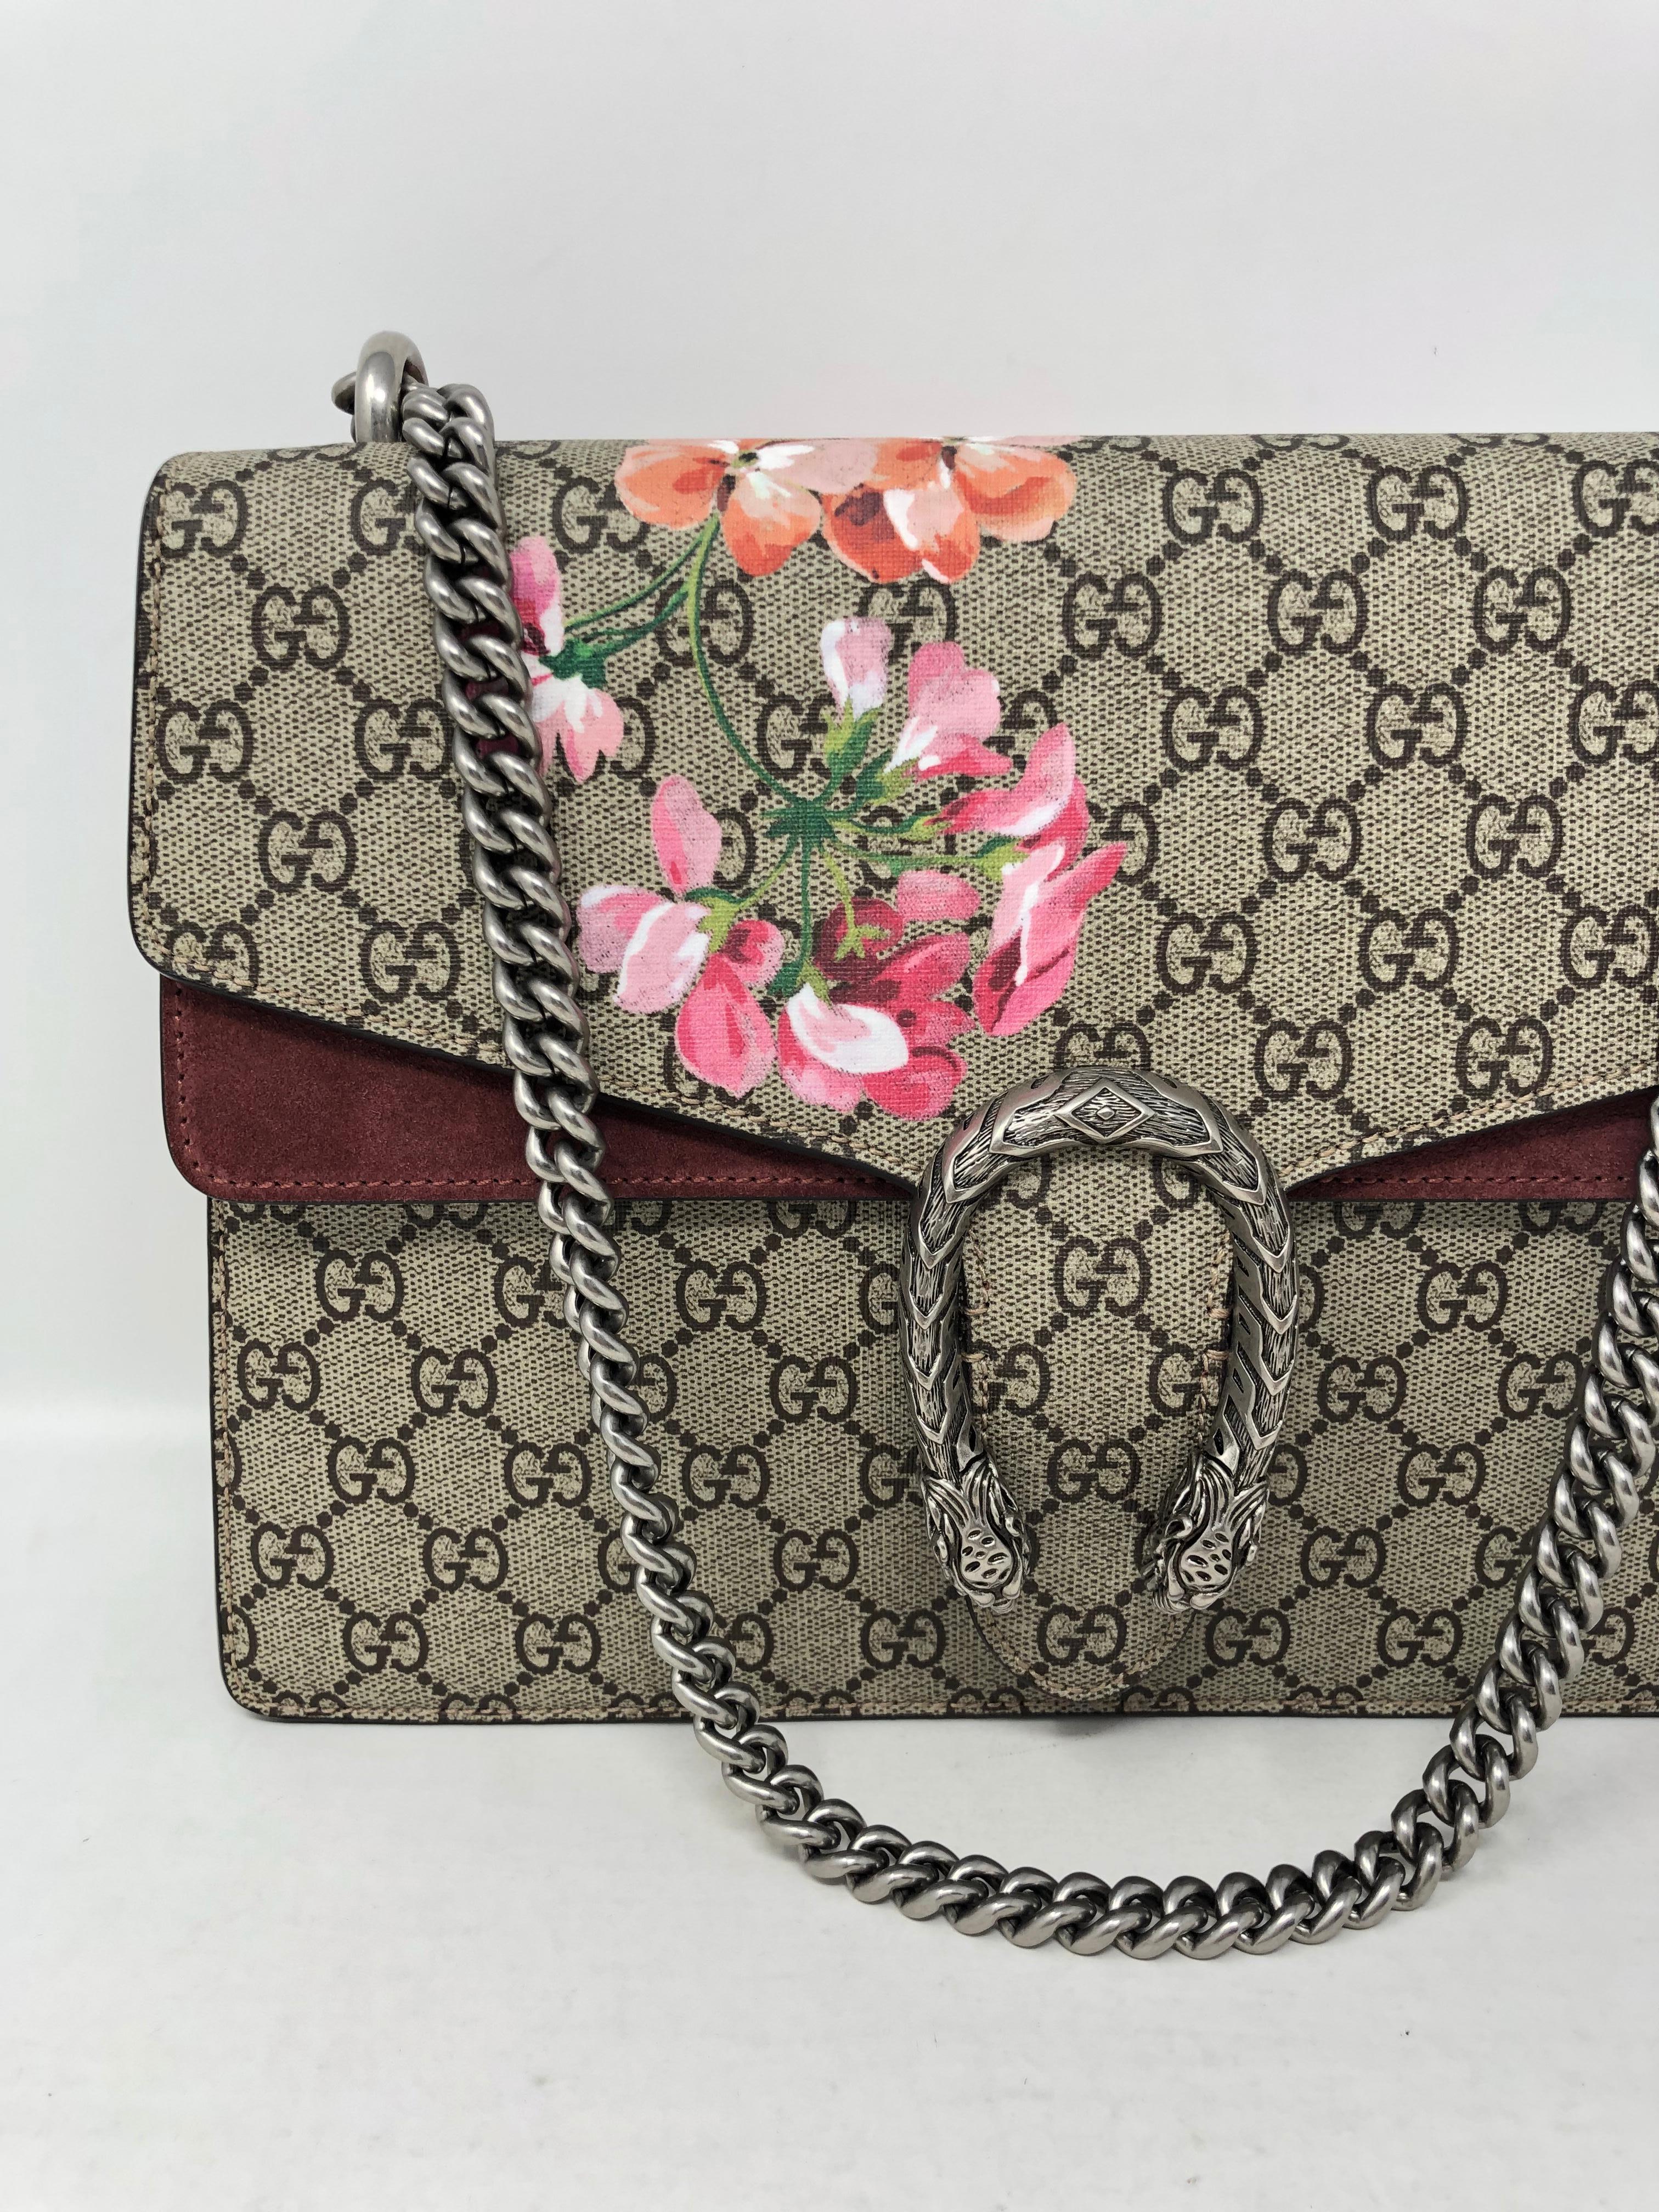 Gucci Dionysus Bag floral with silver hardware. Never used. New condition. Guaranteed authentic. 